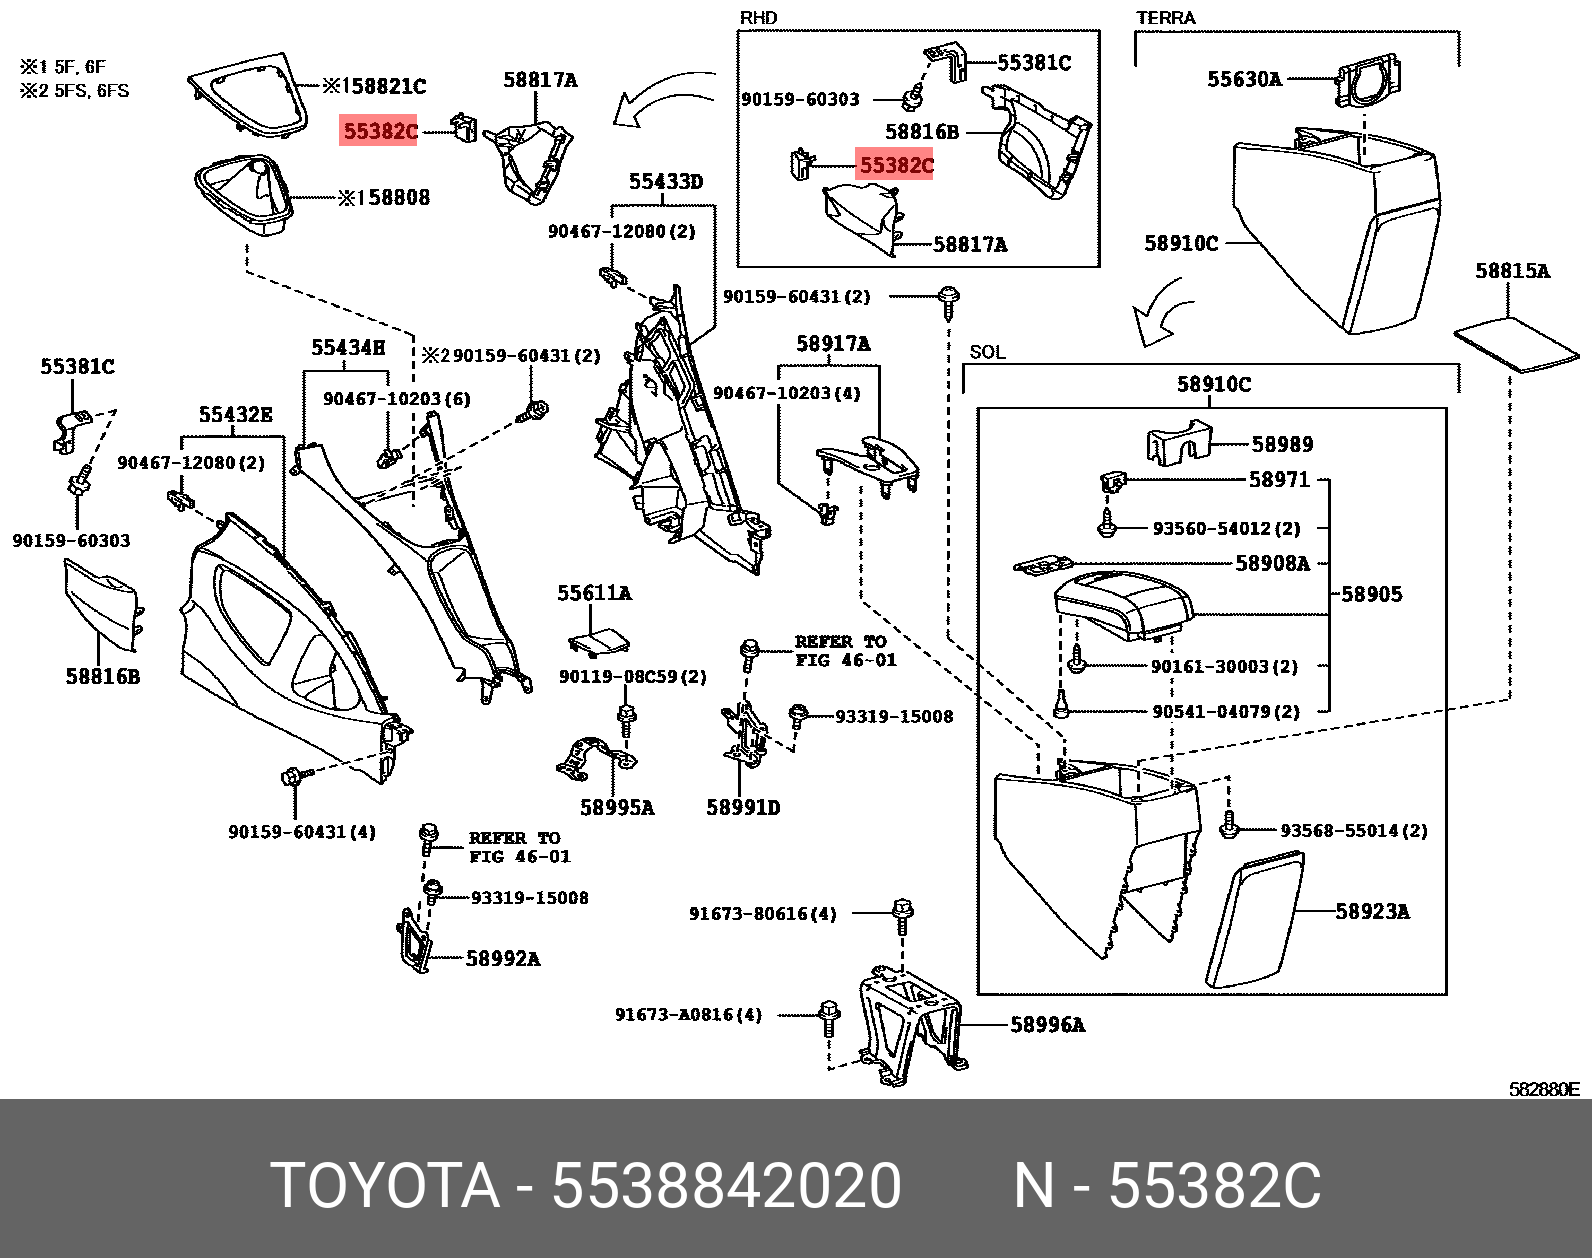 PRIUS (PLUG-IN) LEASE 200912 - 201010, BRACKET, CONSOLE MOUNTING, RH